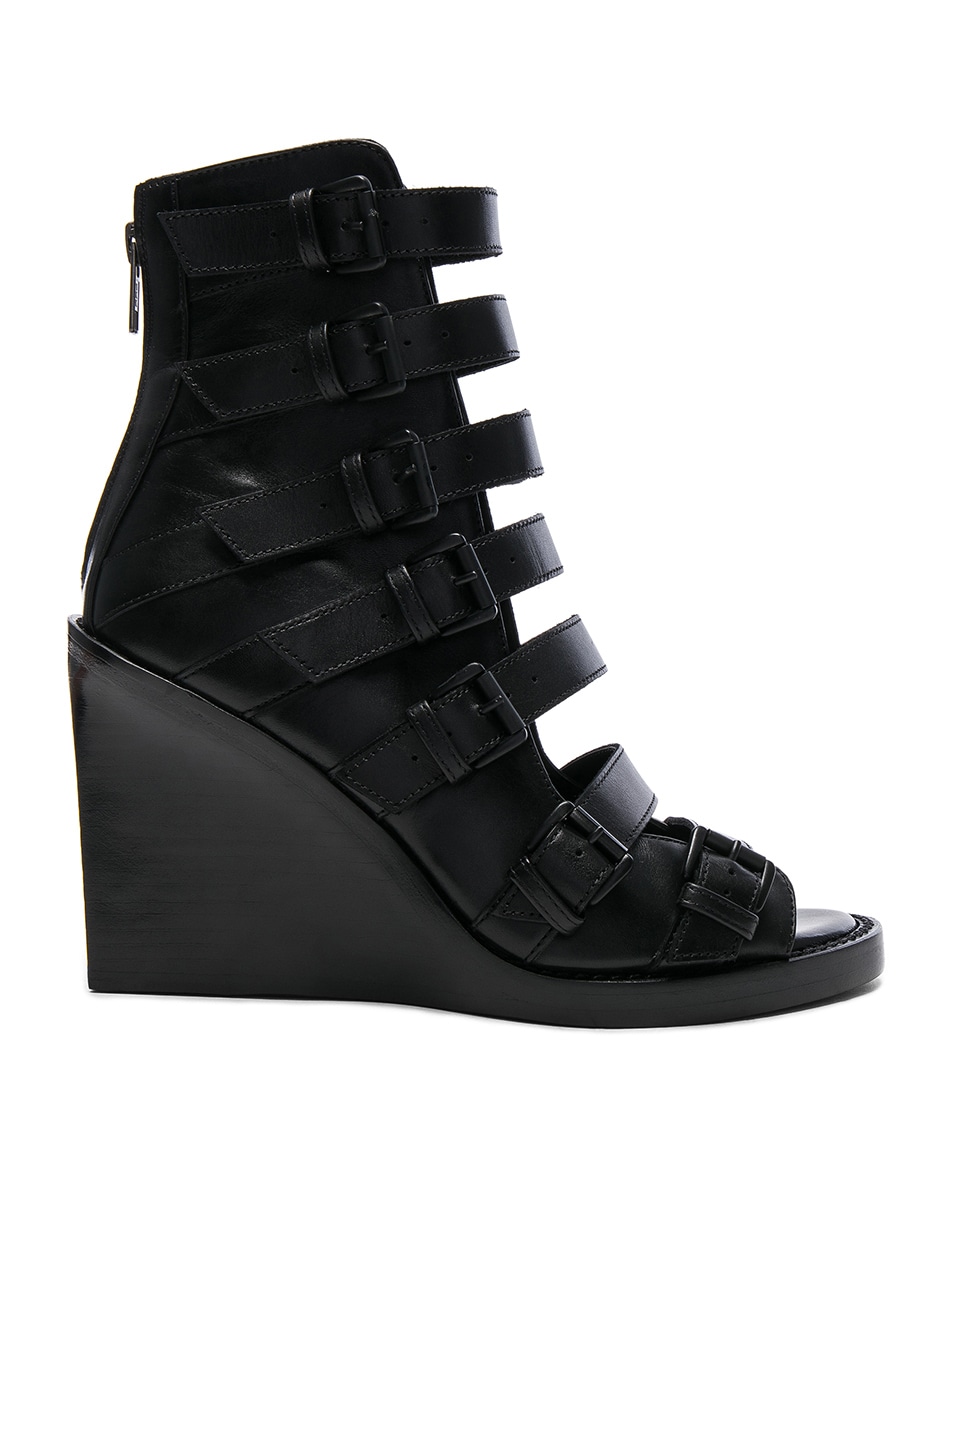 Image 1 of Ann Demeulemeester Leather Wedges in Black & Black